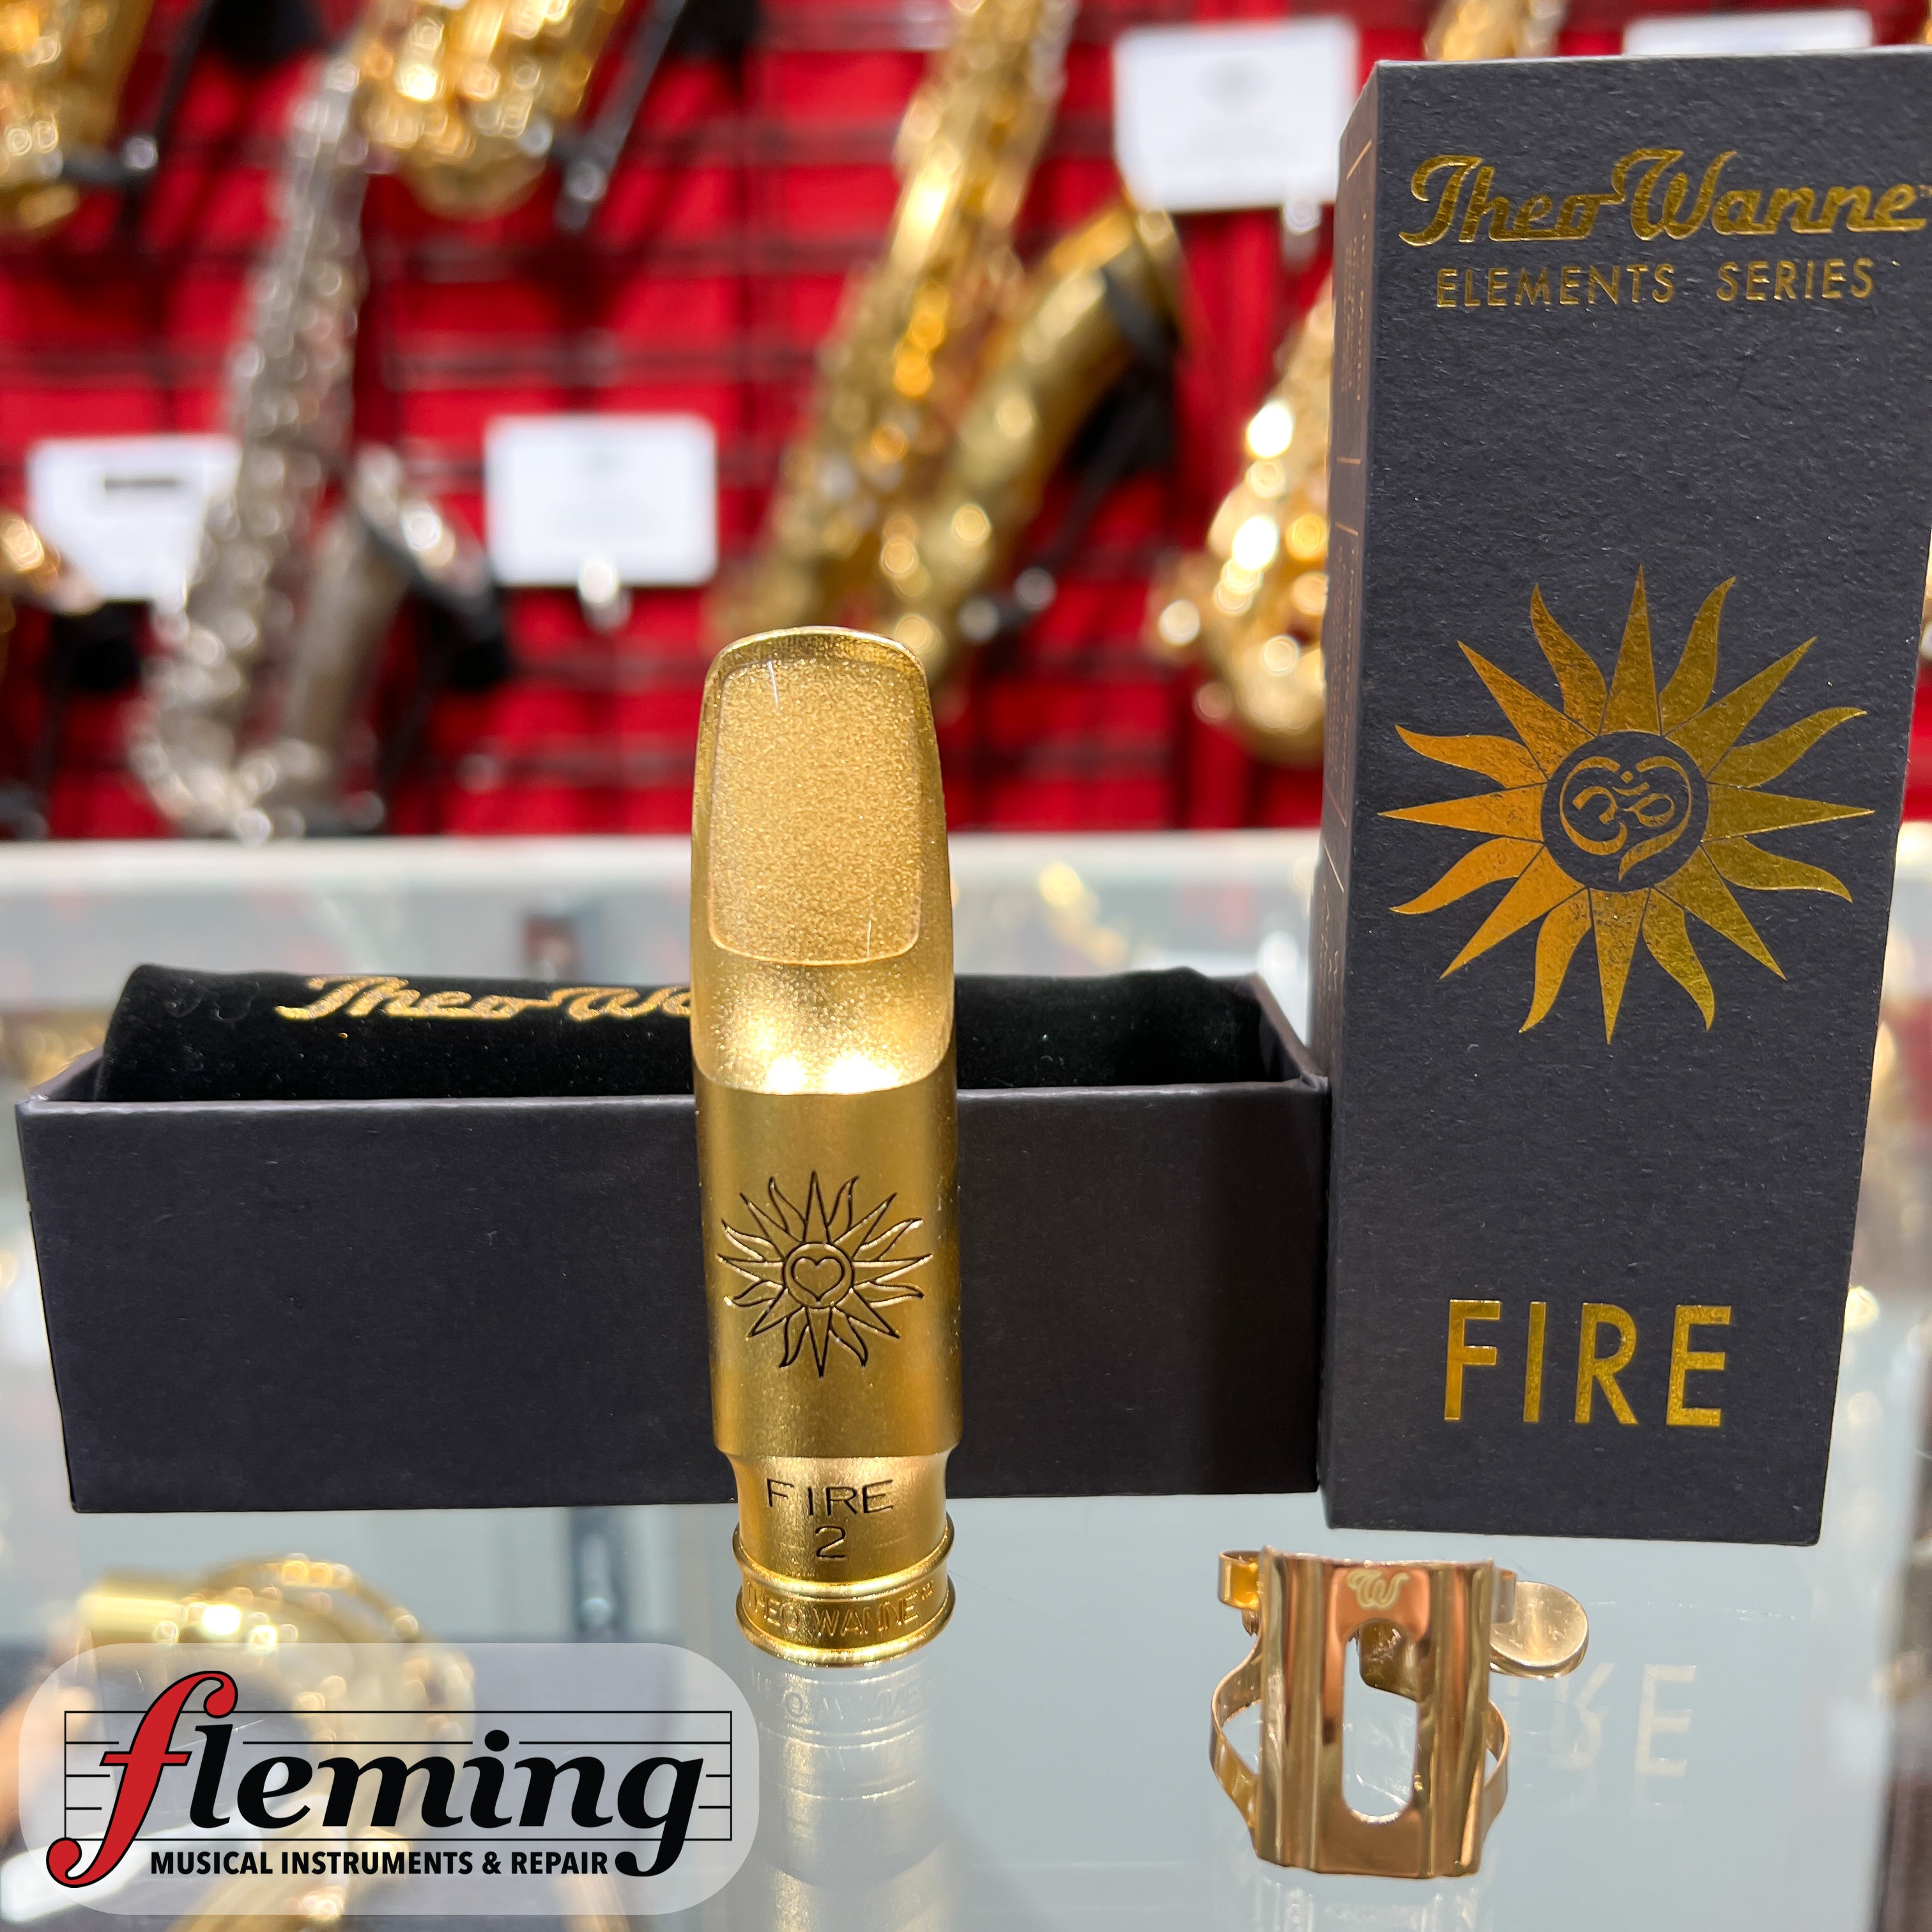 Theo Wanne FIRE 2 Alto Mouthpiece 7  Fleming Musical Instruments & Repair